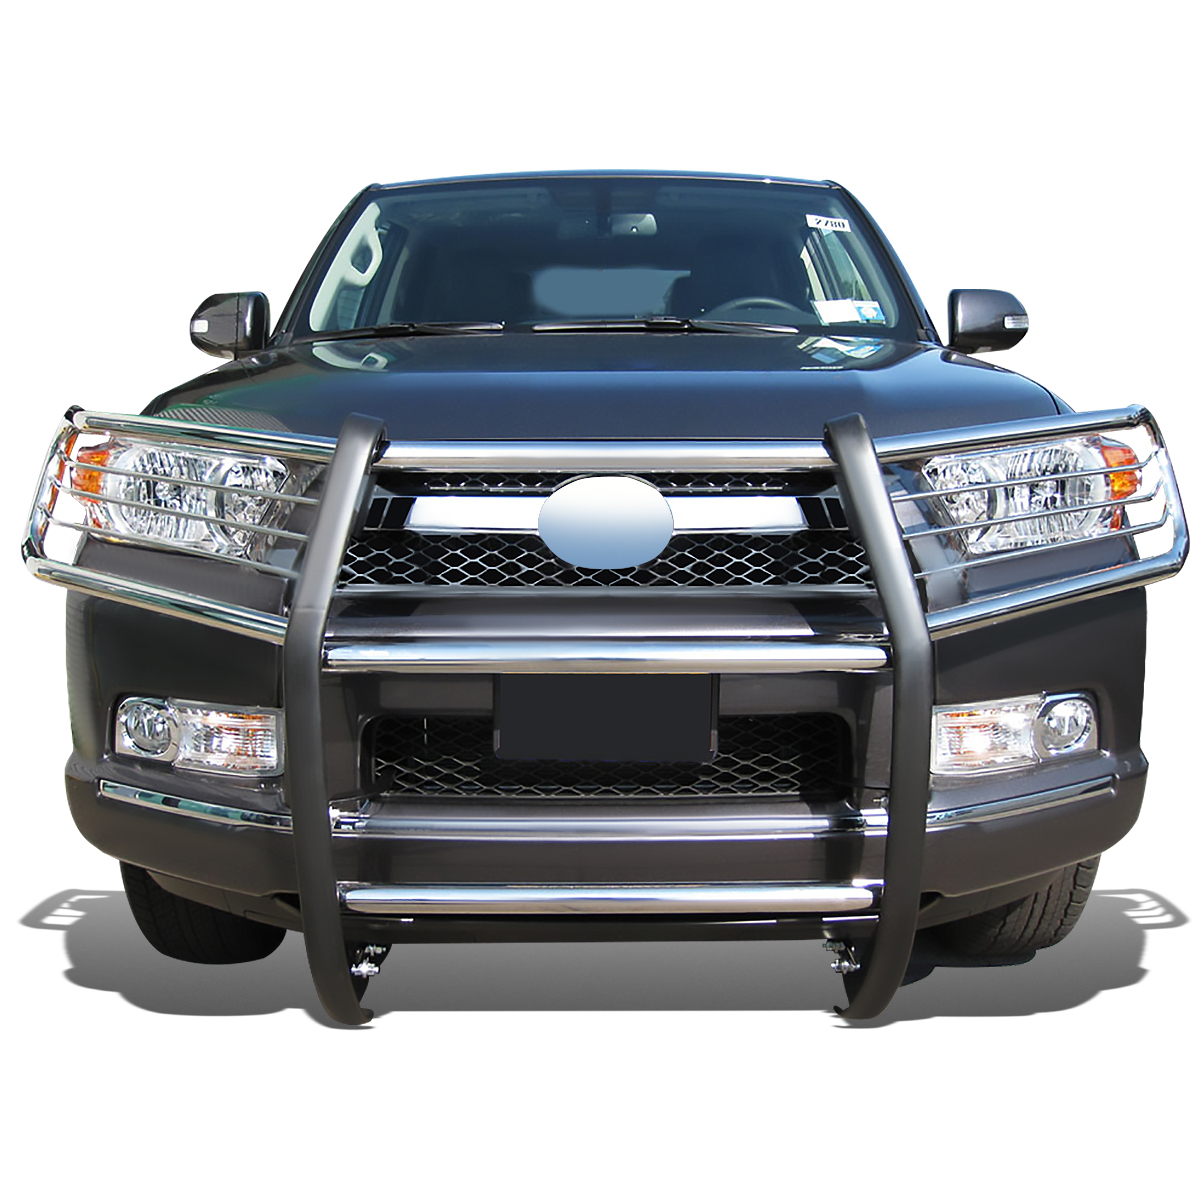 DNA Motoring GRILL-G-069-SS For 2010 to 2013 Toyota 4Runner N280 Front Bumper Protector Brush Grille Guard (Chrome) 11 12